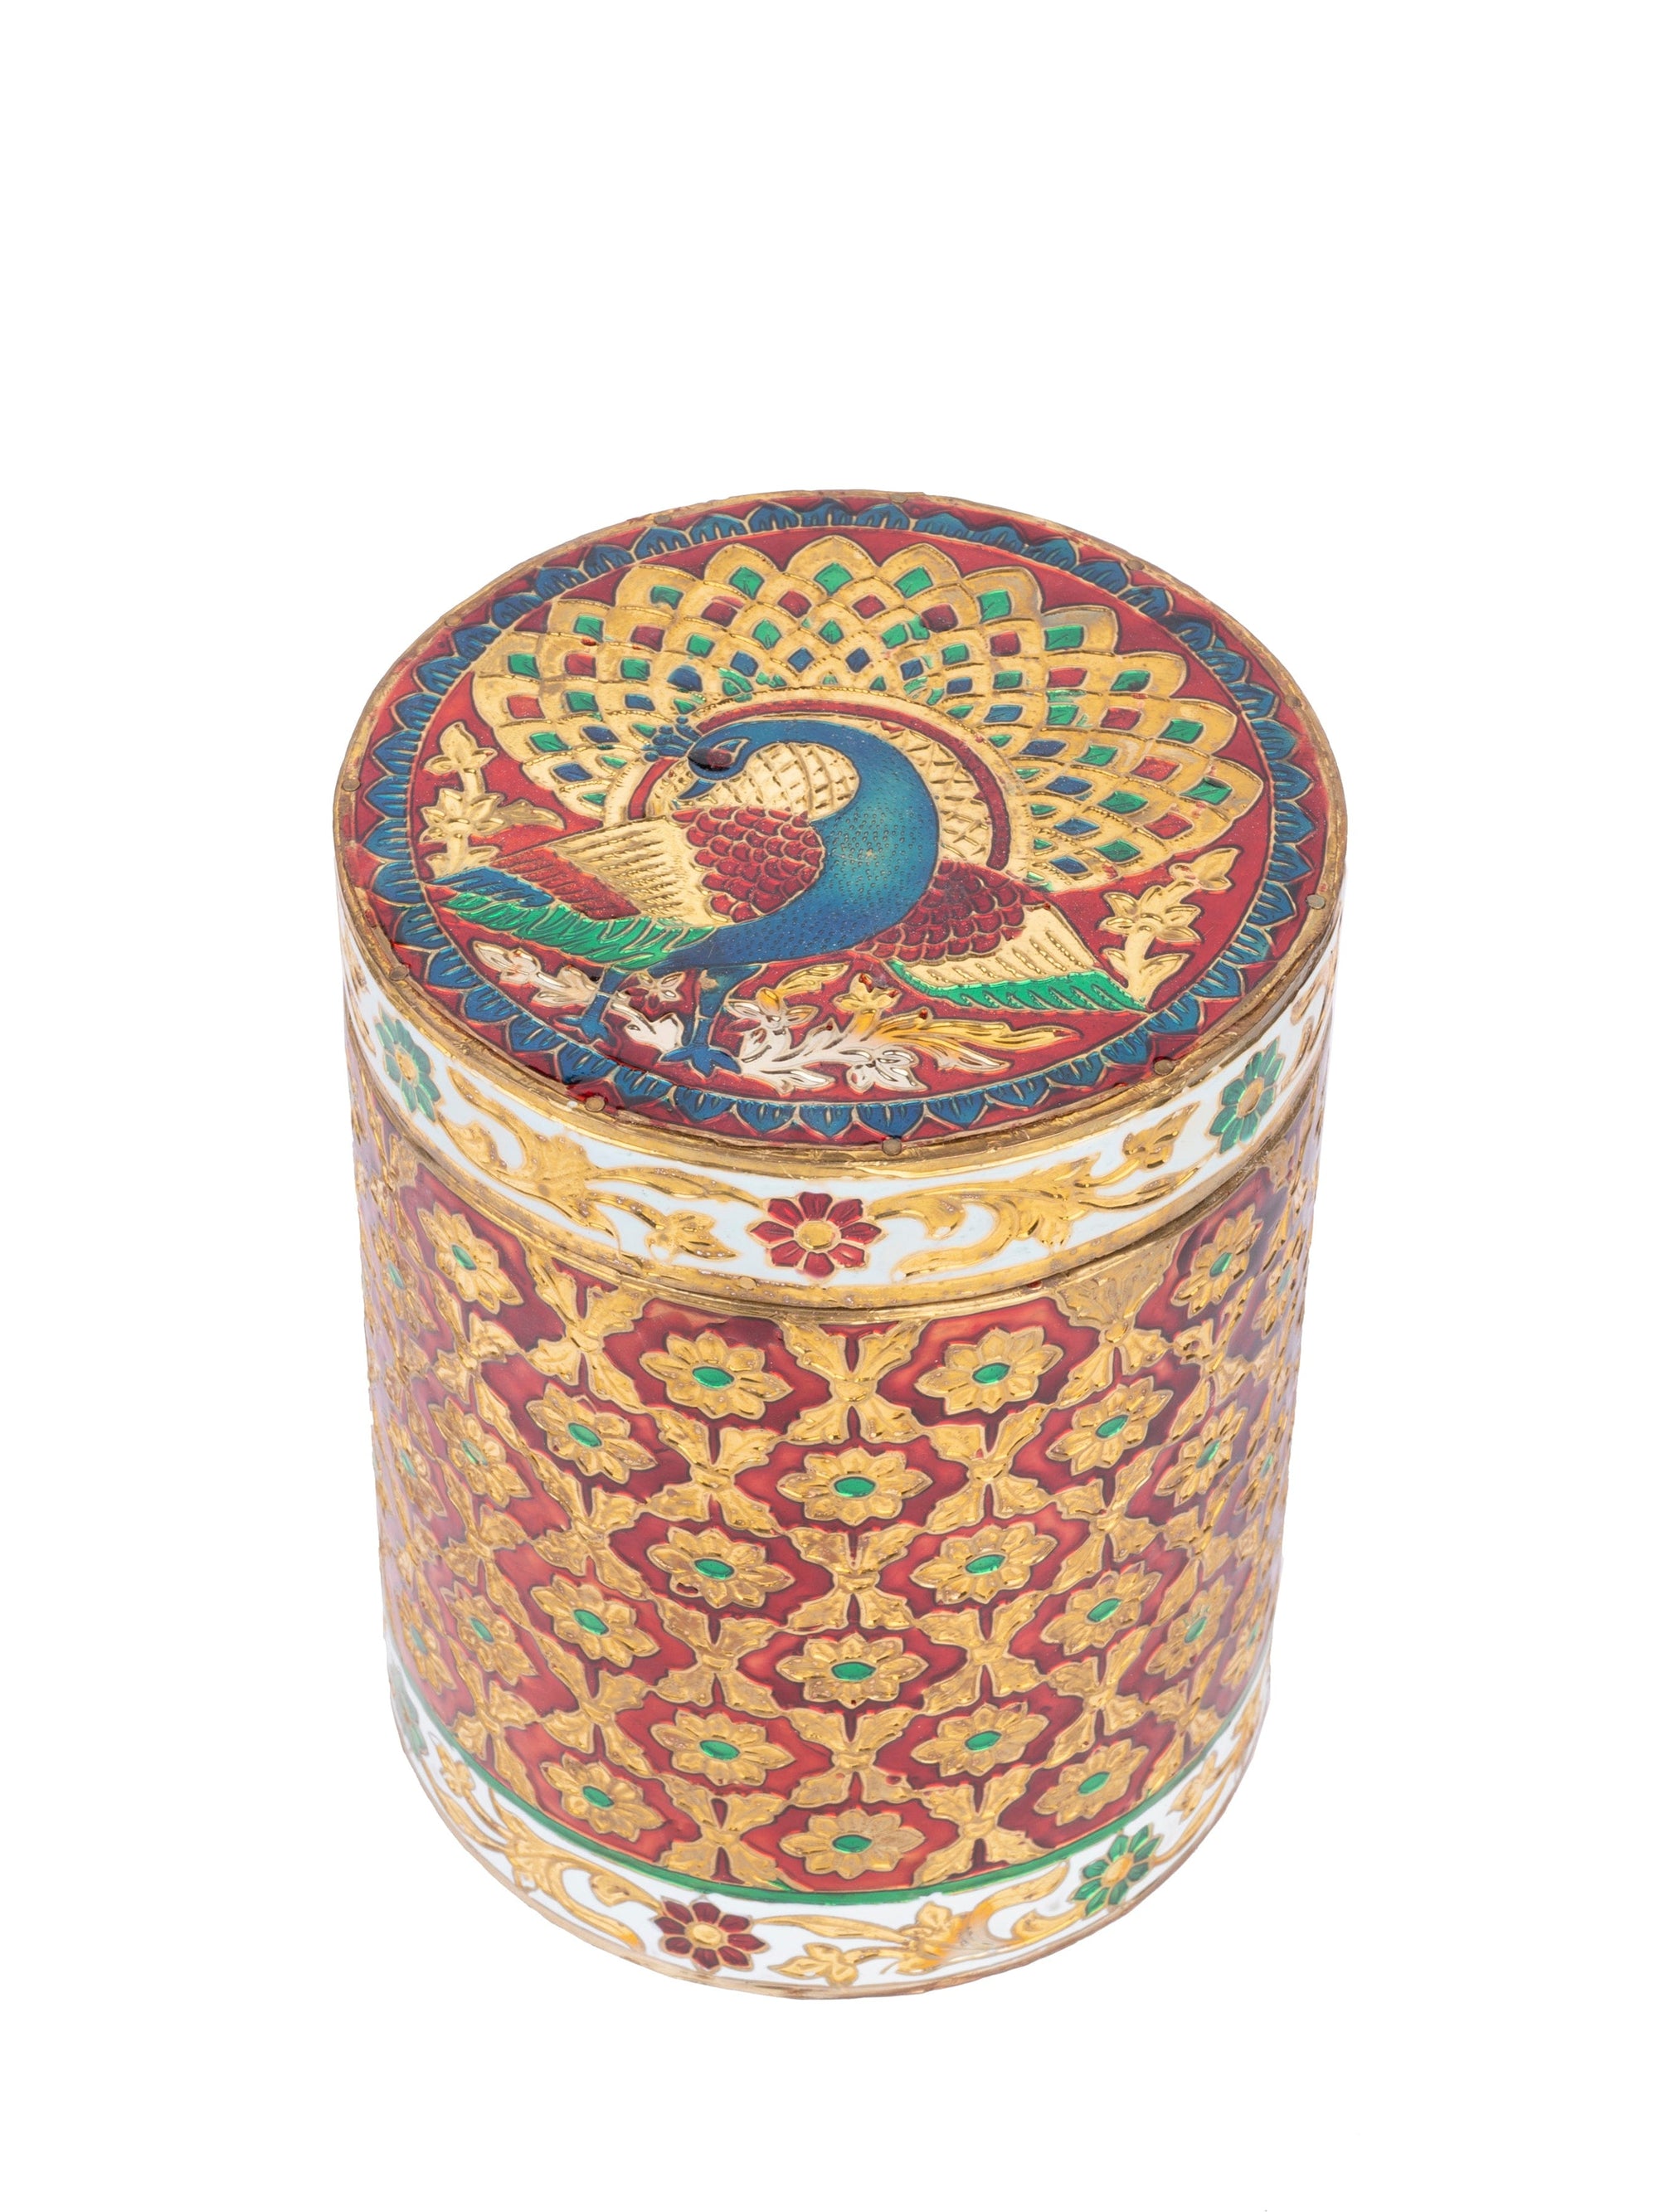 Meenakari Art Storage Jar / Canister / Container - 7 inches height - The Heritage Artifacts